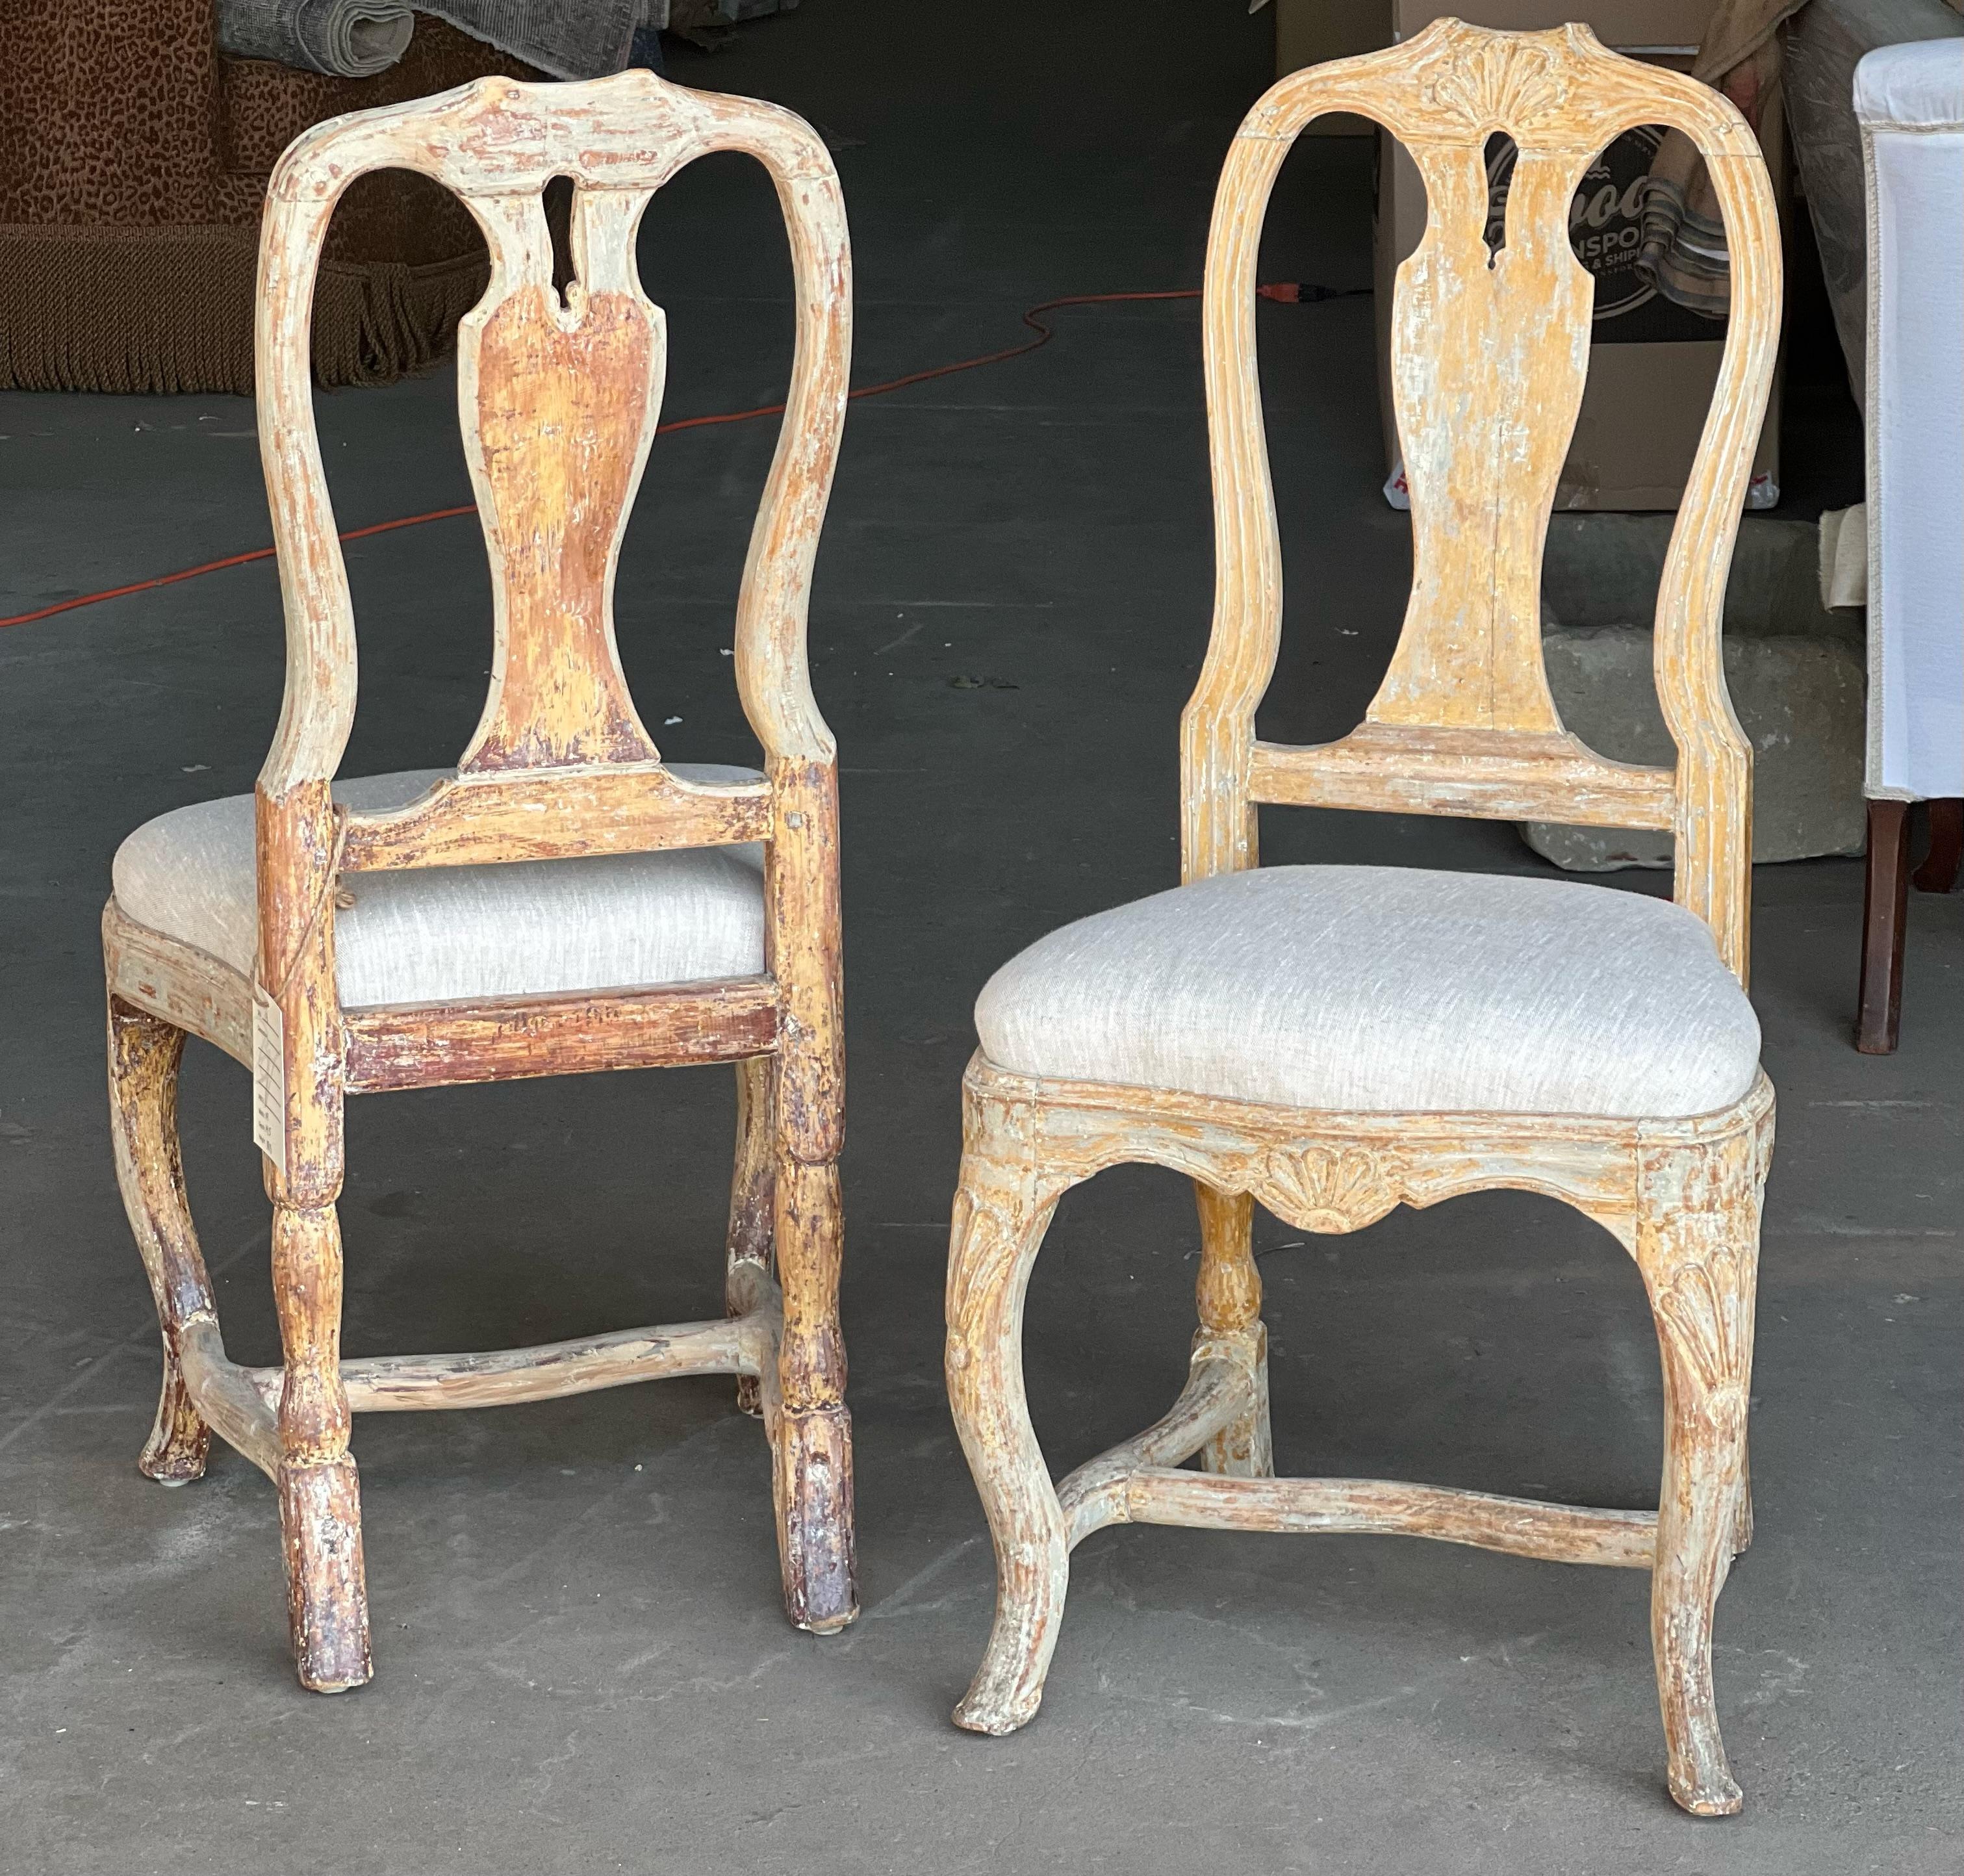 A stunning pair of Swedish Rococo chairs that are sturdy with nice proportions with hand carved details. This pair has been dry scraped to the original paint and has new linen upholstery. Mid to late 18th Century. Absolutely perfect for any design